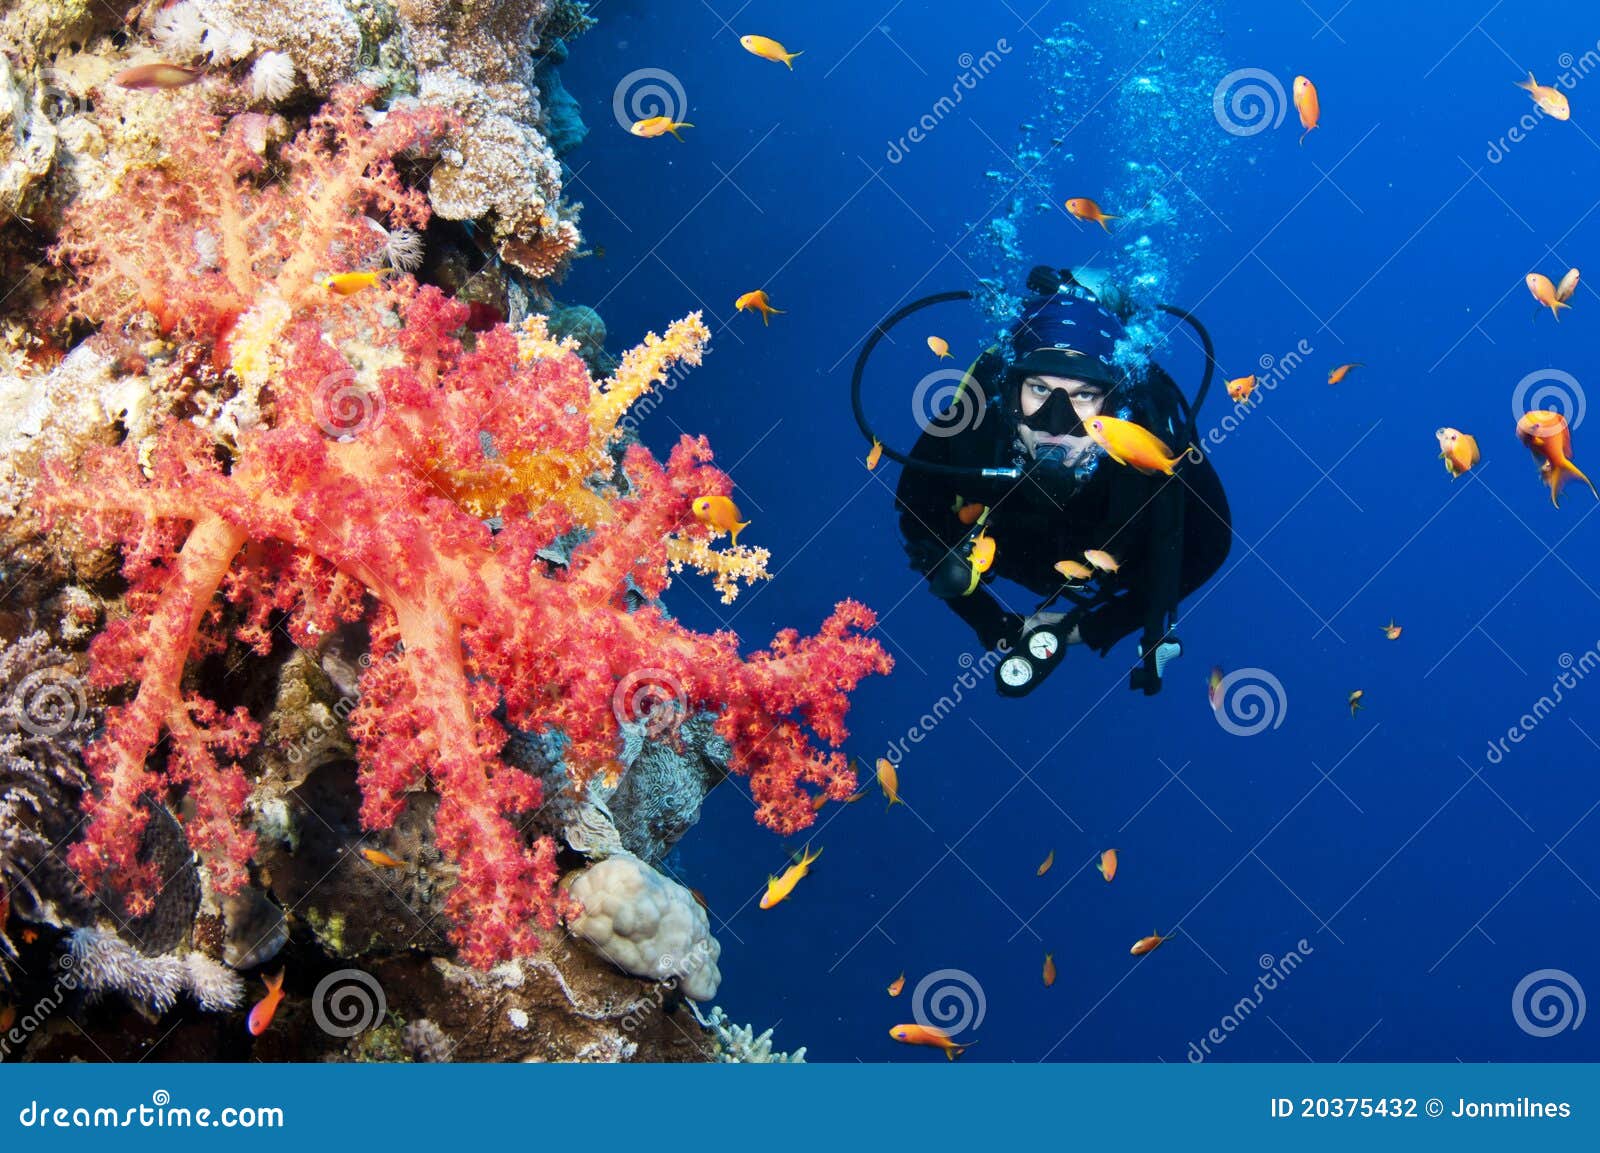 Bright Red Tropical Coral and Scuba Diver Stock Photo - Image of ...